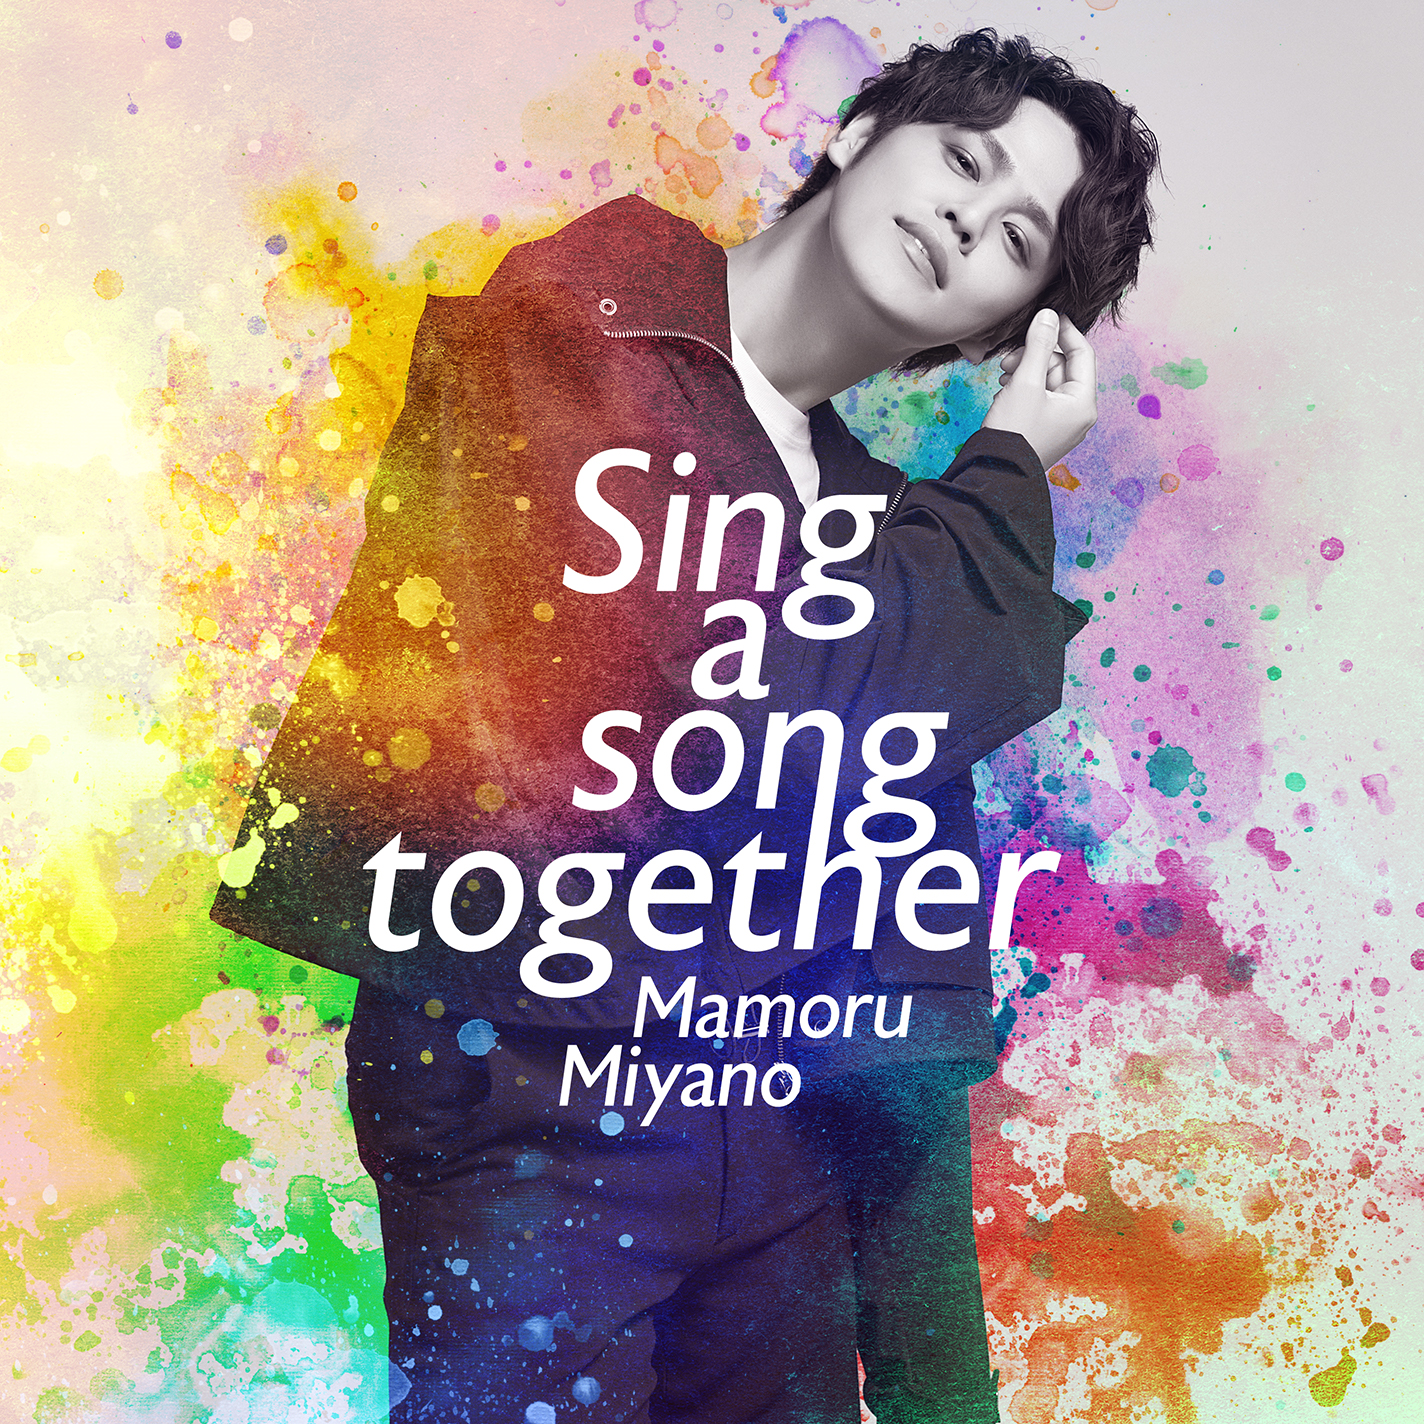 『Sing a song together』ジャケット